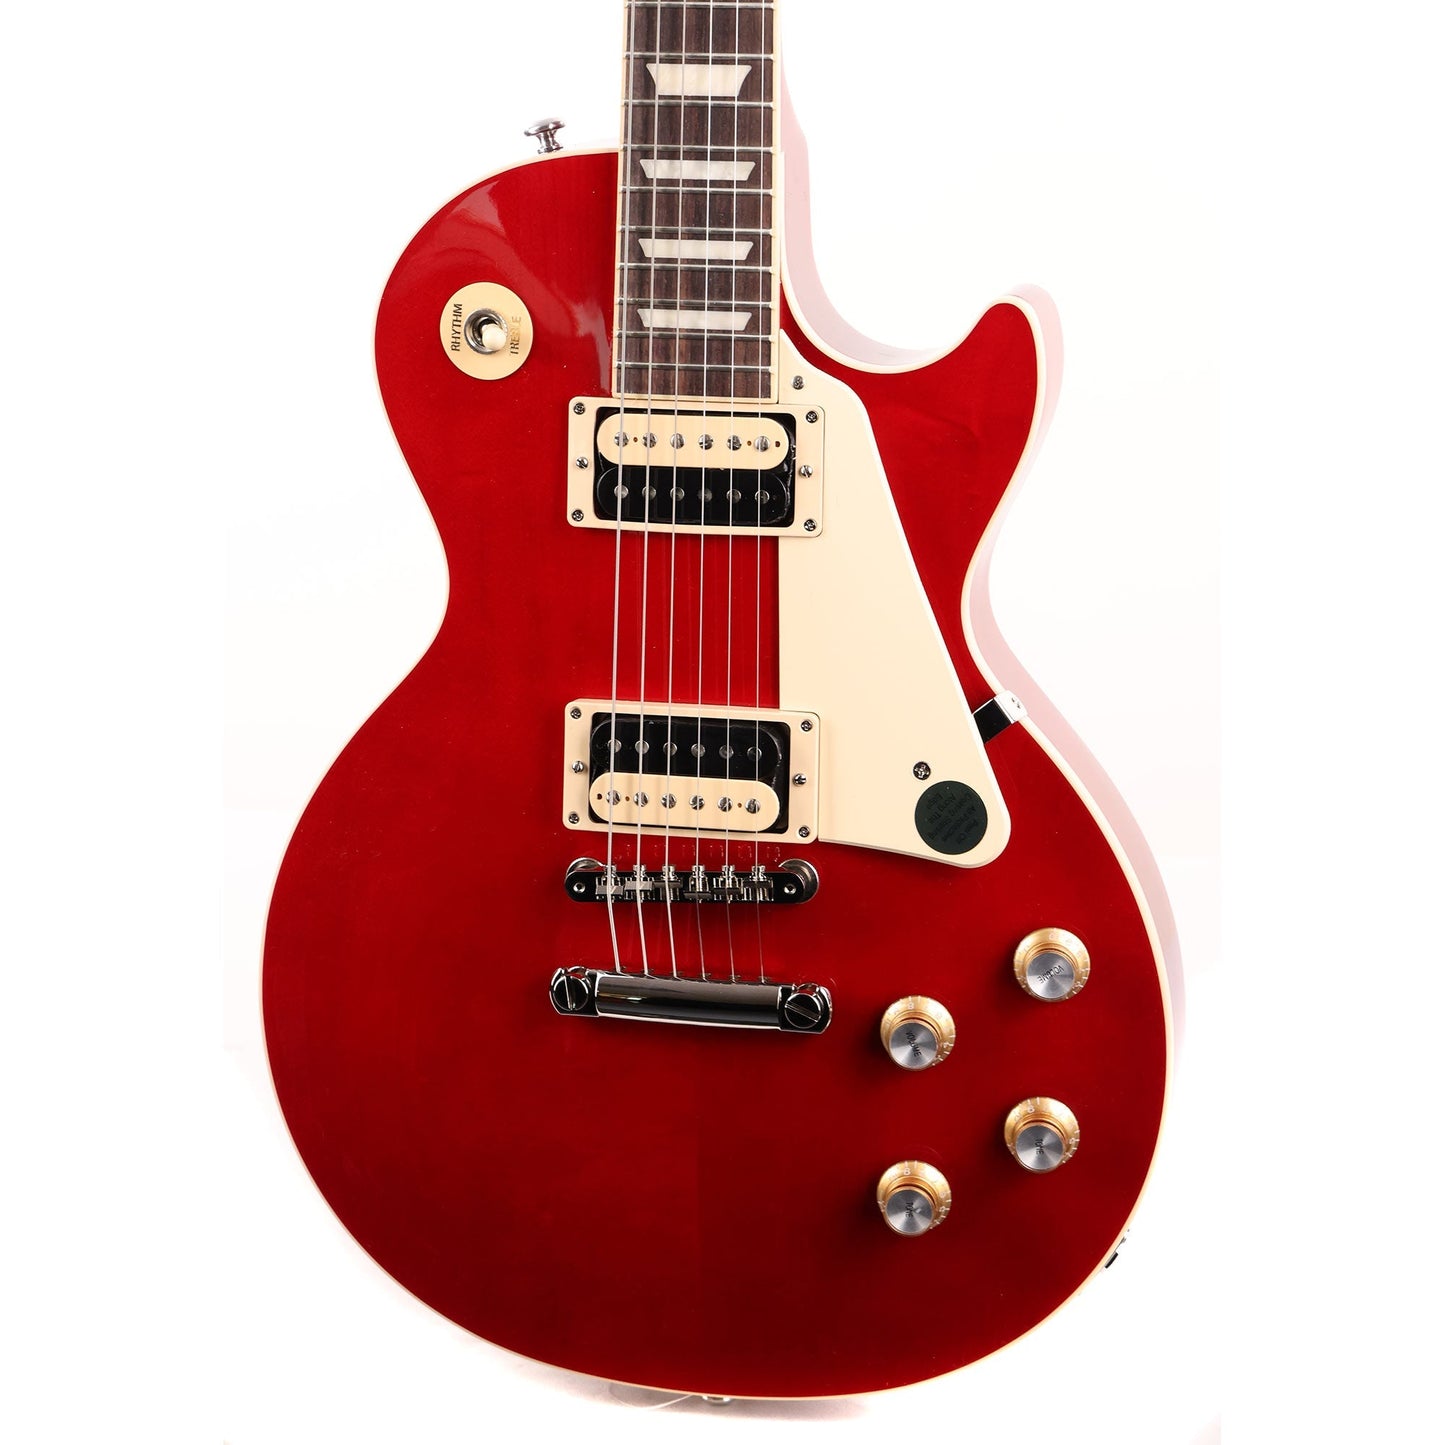 GIBSON - LES PAUL CLASSIC ELECTRIC GUITAR - TRANSLUCENT CHERRY